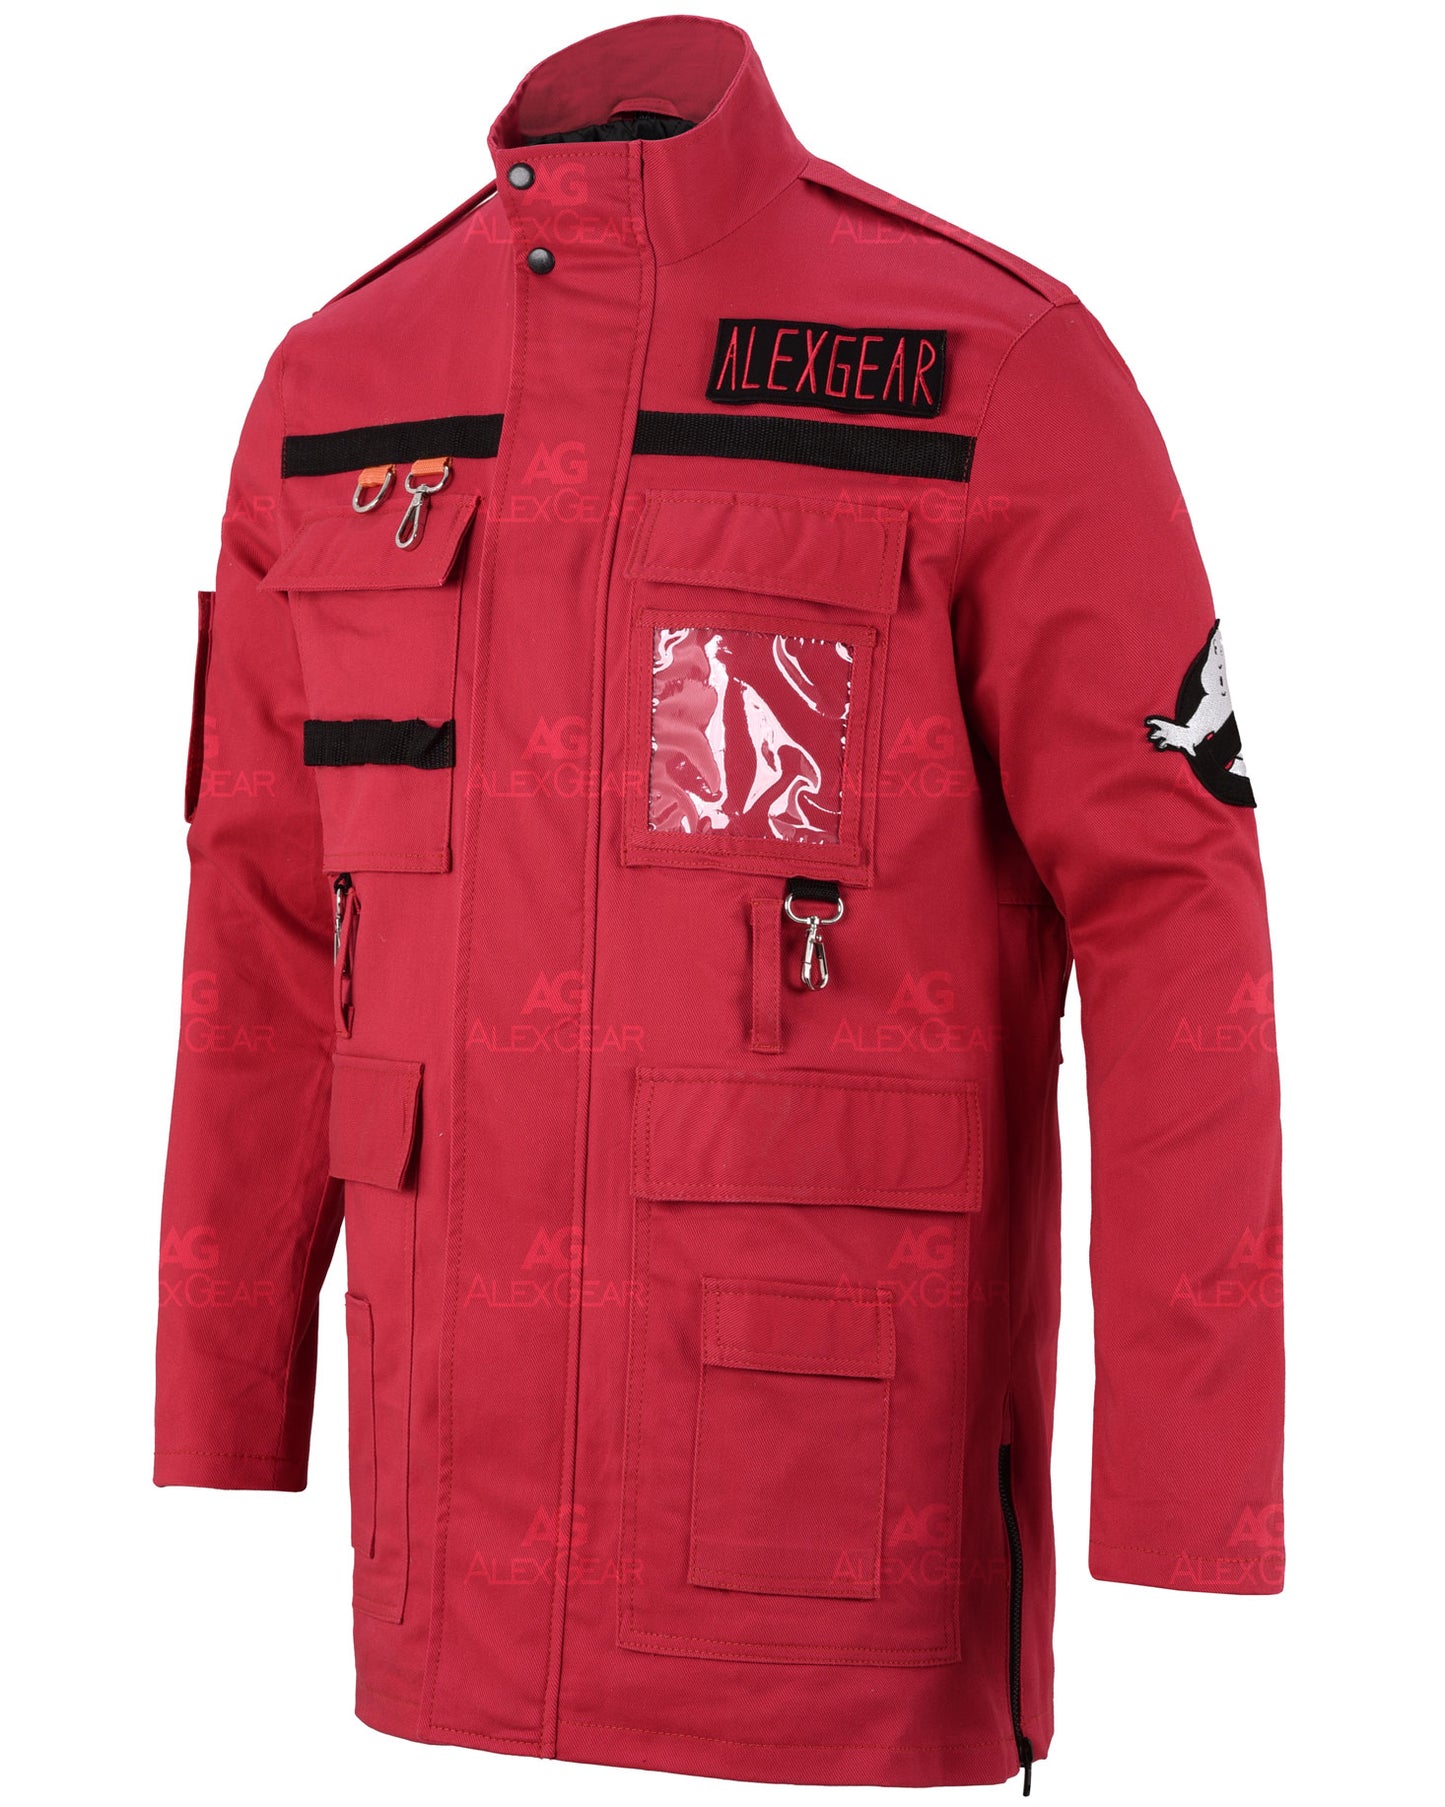 Frozen Empire Red Ghostbusters Jacket